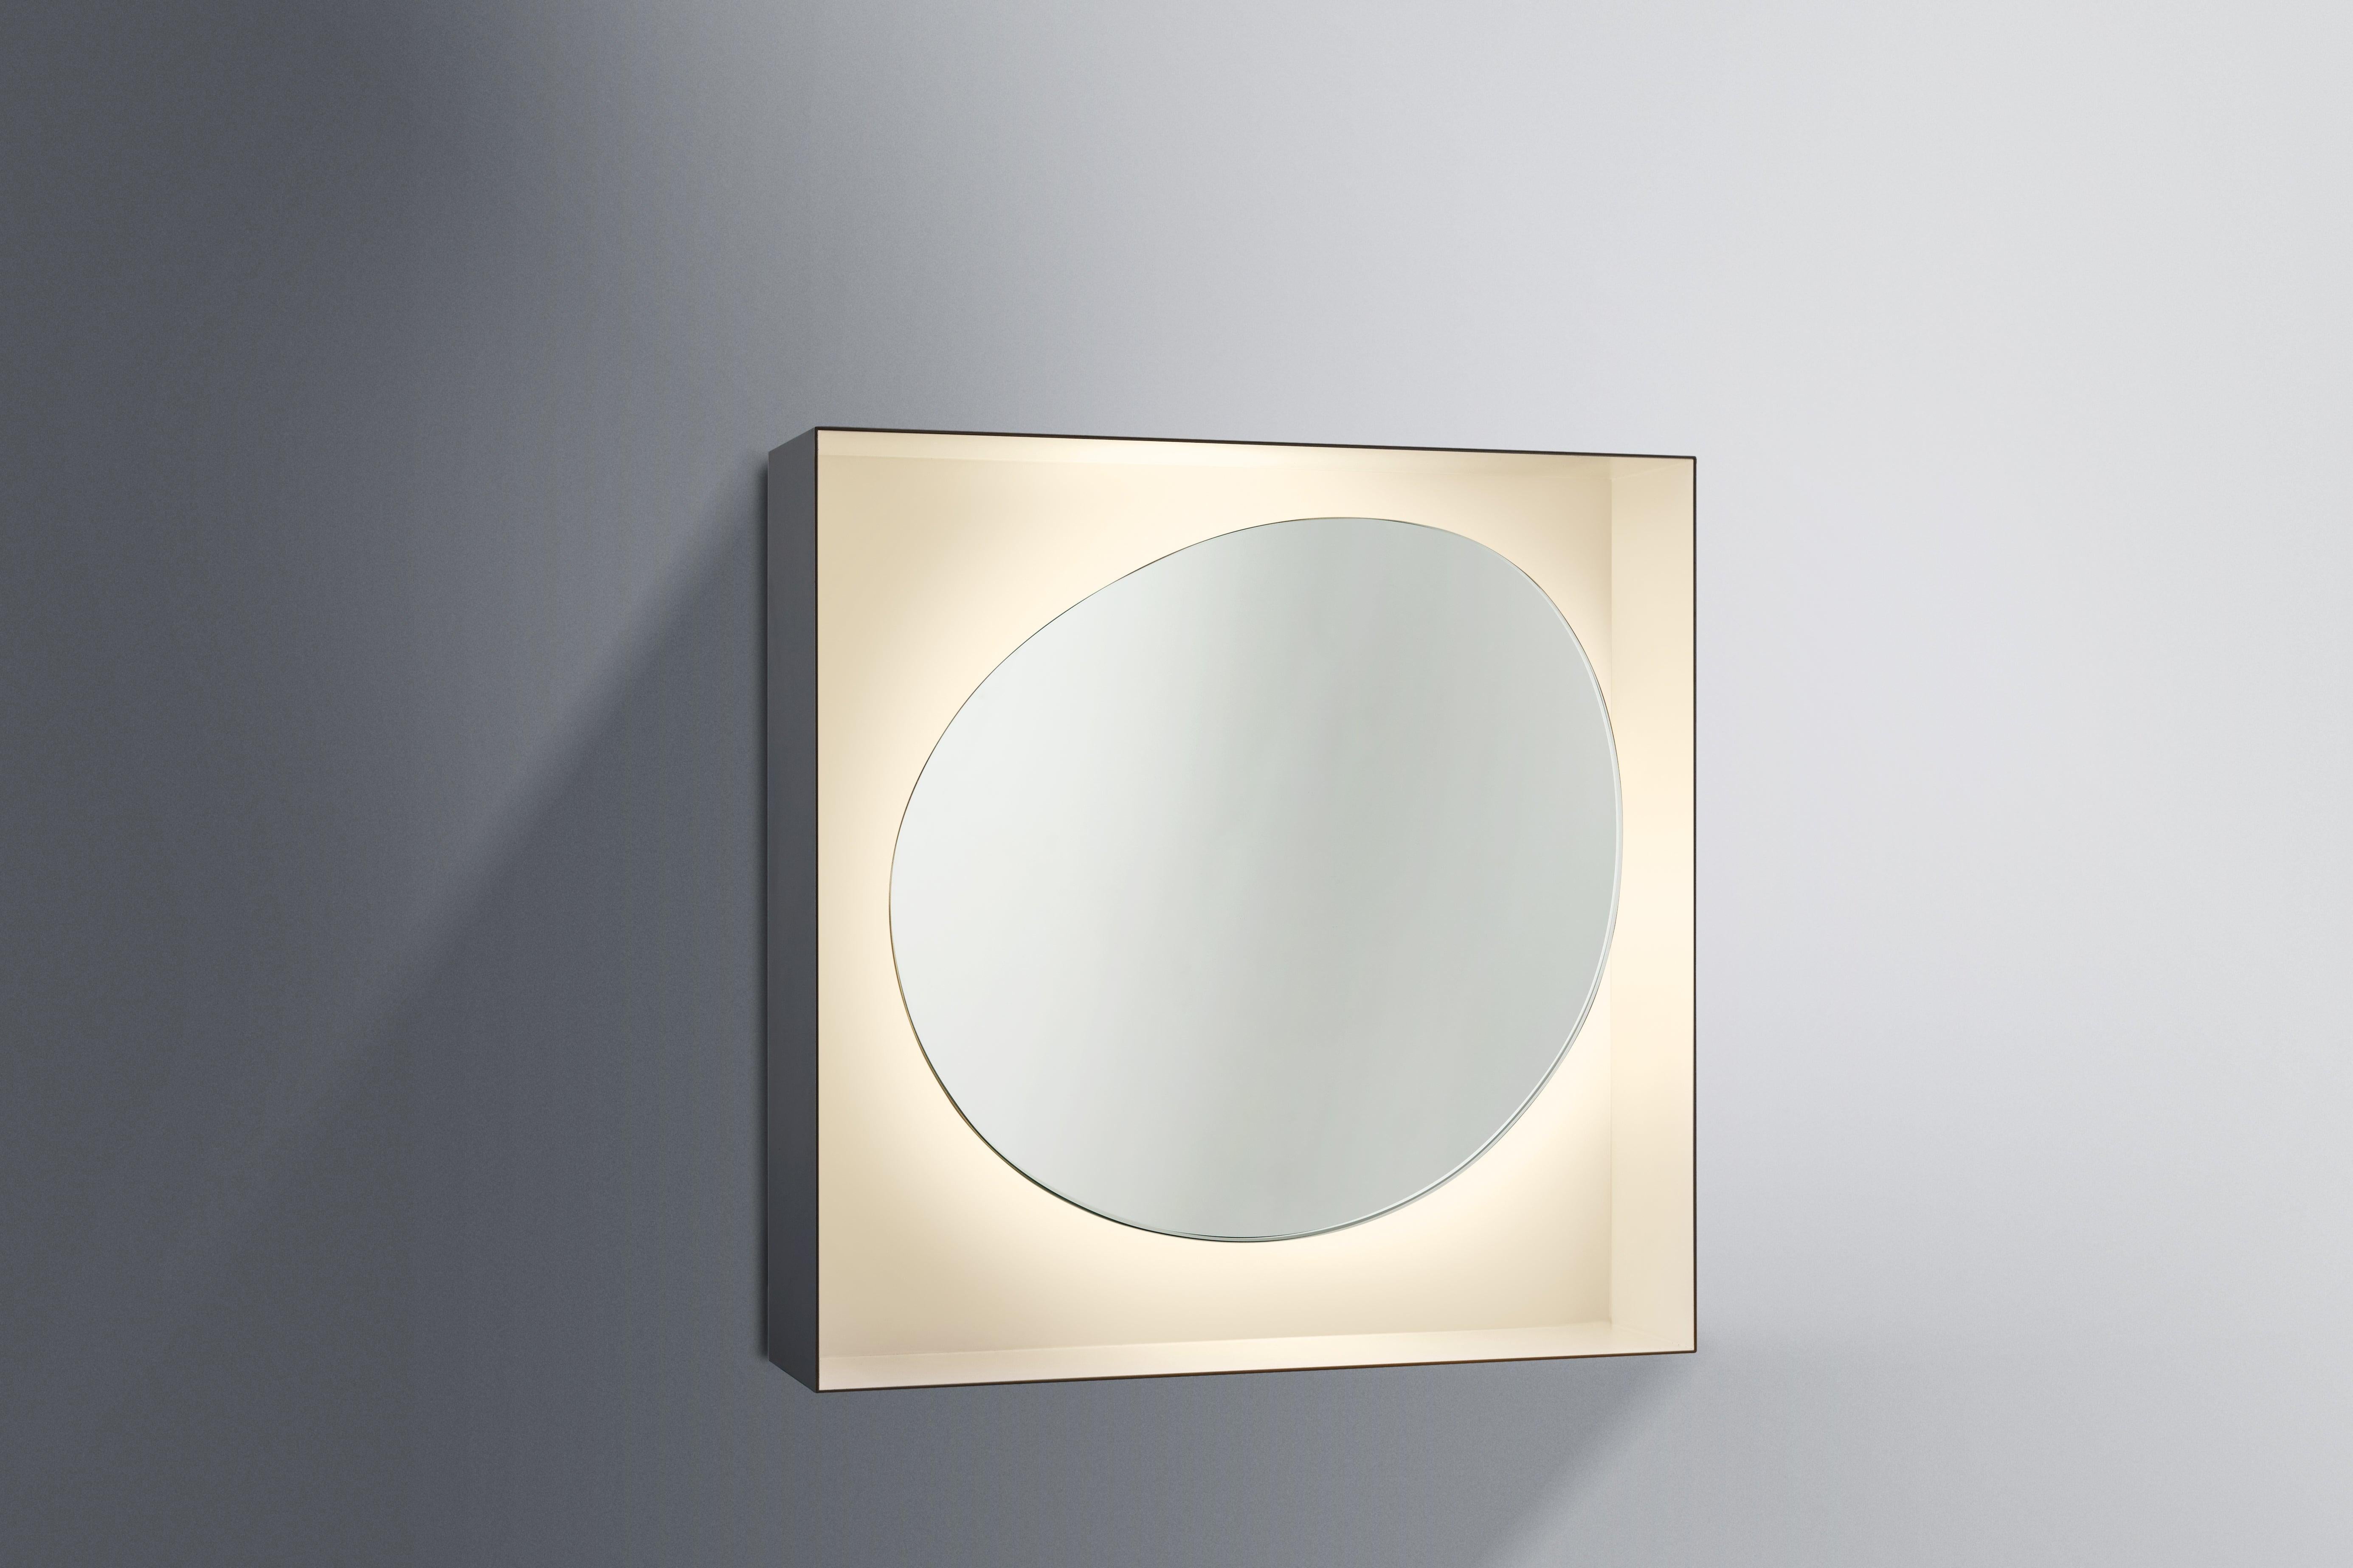 Wall sconce FC02 design by the Argentine architect Florencia Costa made in Italy in Limited and certificated Edition, metal varnished white with mirror. At Pollice Light Gallery: a project that brings together influential contemporary designers,